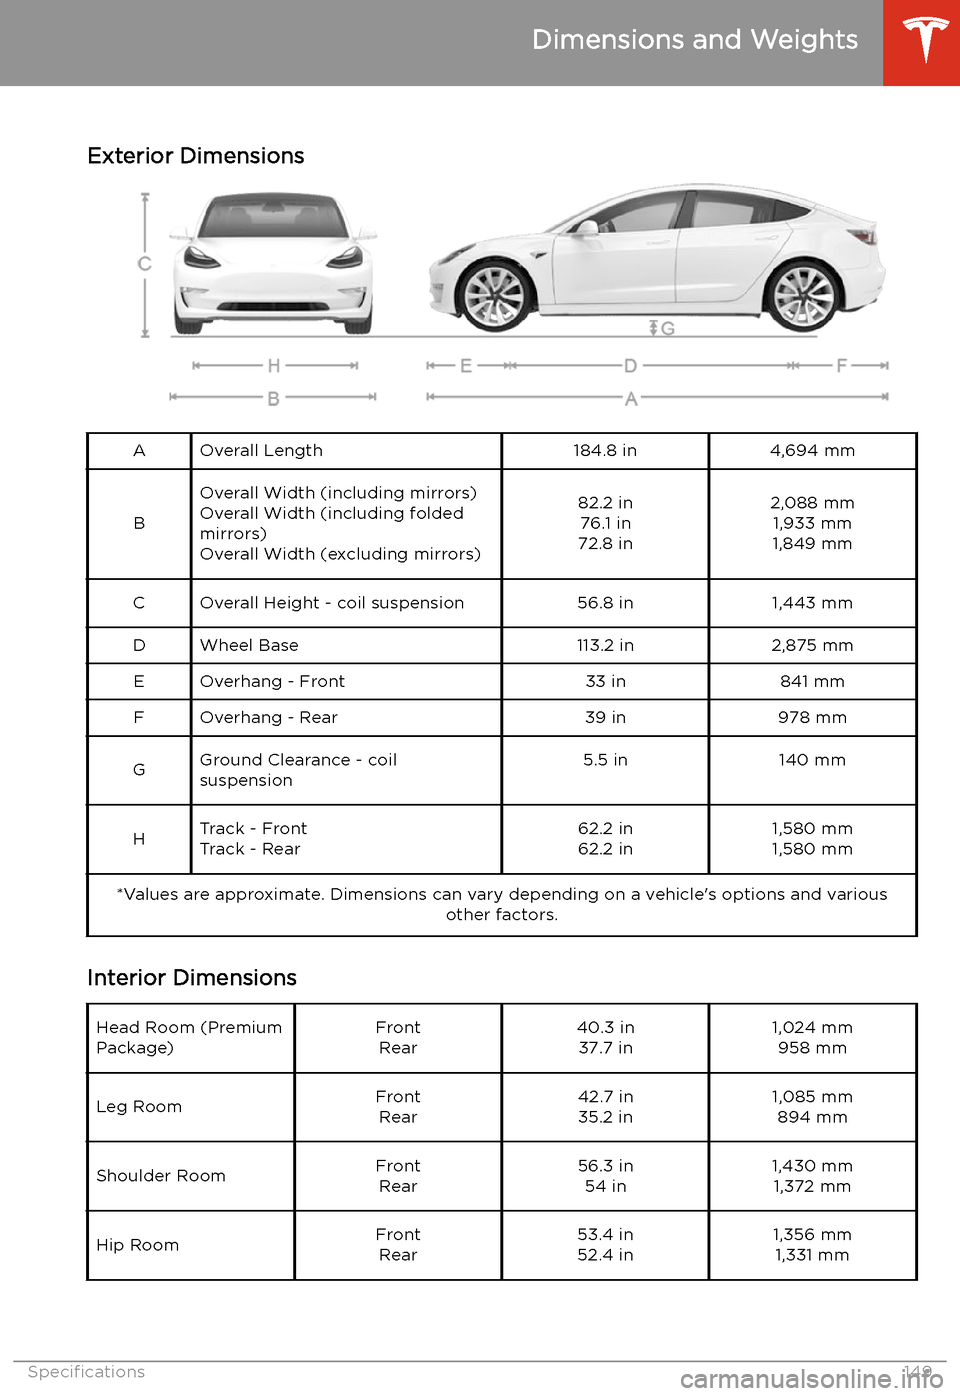 TESLA MODEL 3 2019  Owners Manual (Europe) Dimensions and Weights
Exterior Dimensions
AOverall Length184.8 in4,694 mm
B
Overall Width (including mirrors) Overall Width (including folded
mirrors)
Overall Width (excluding mirrors)82.2 in 76.1 in